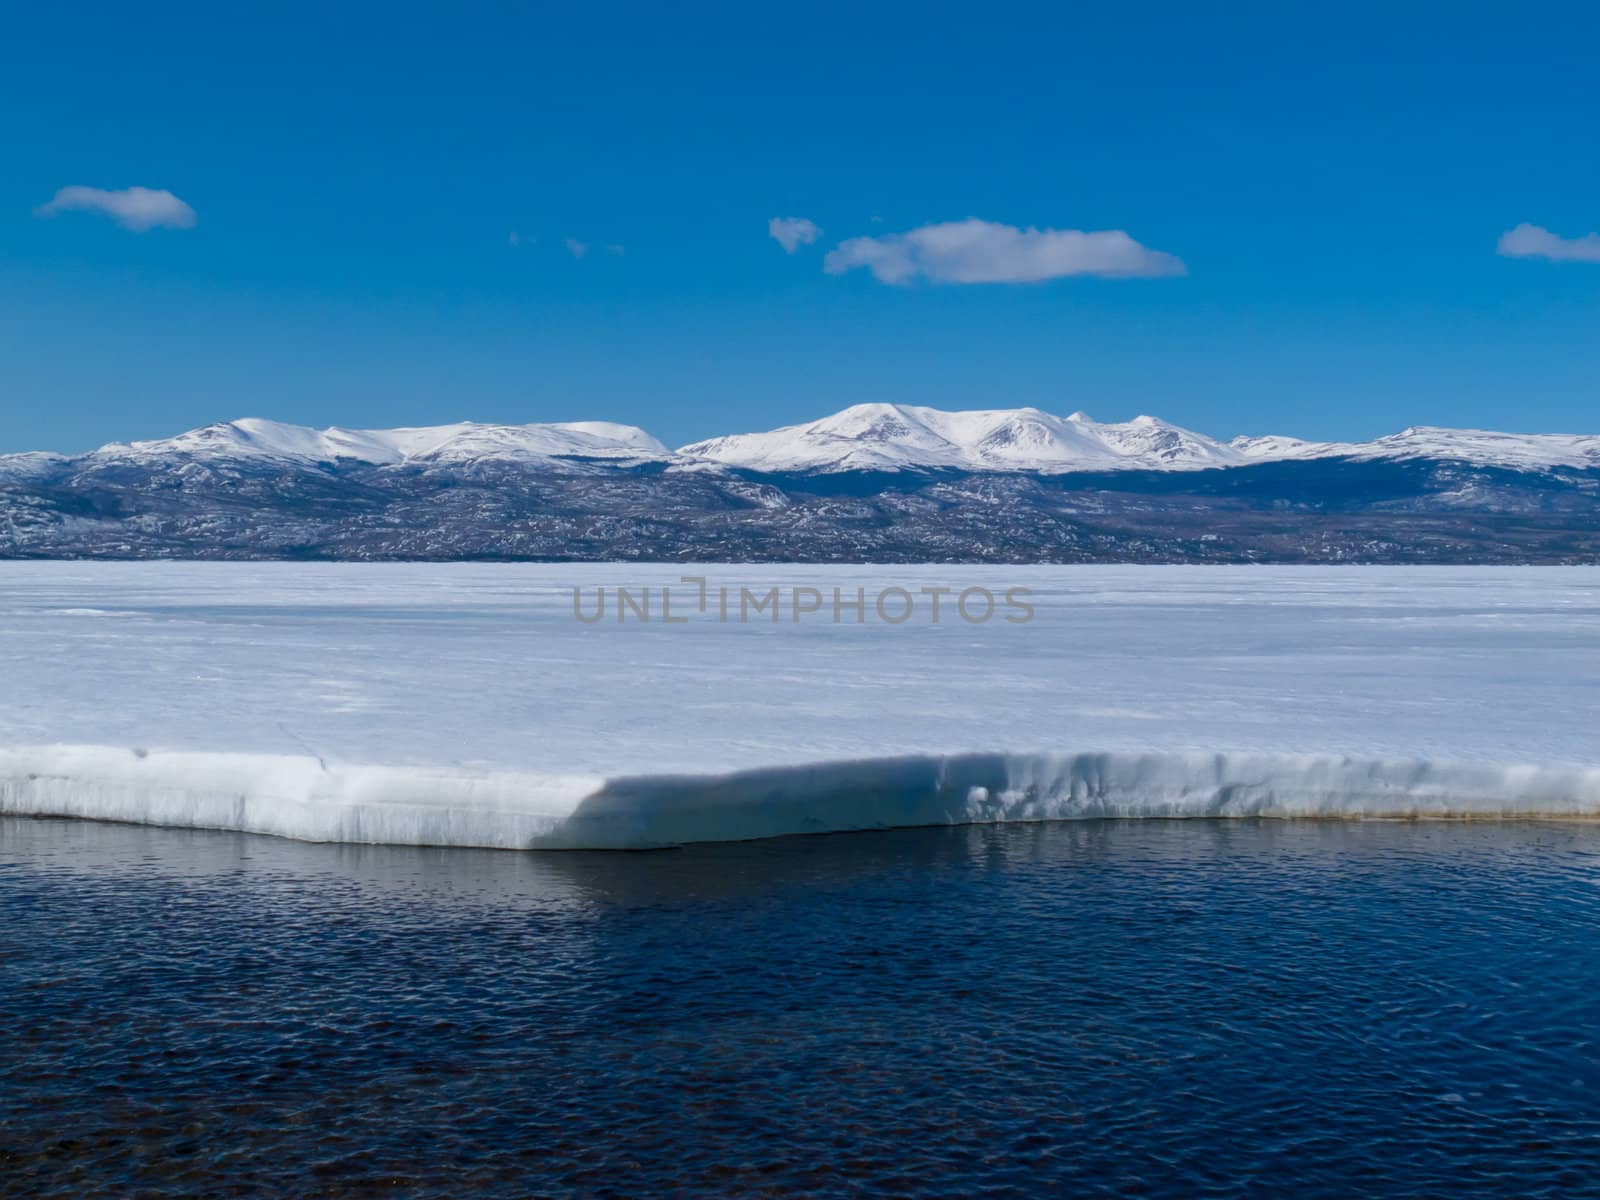 Snowy Mountains at frozen Lake Laberge, Yukon, Canada by PiLens